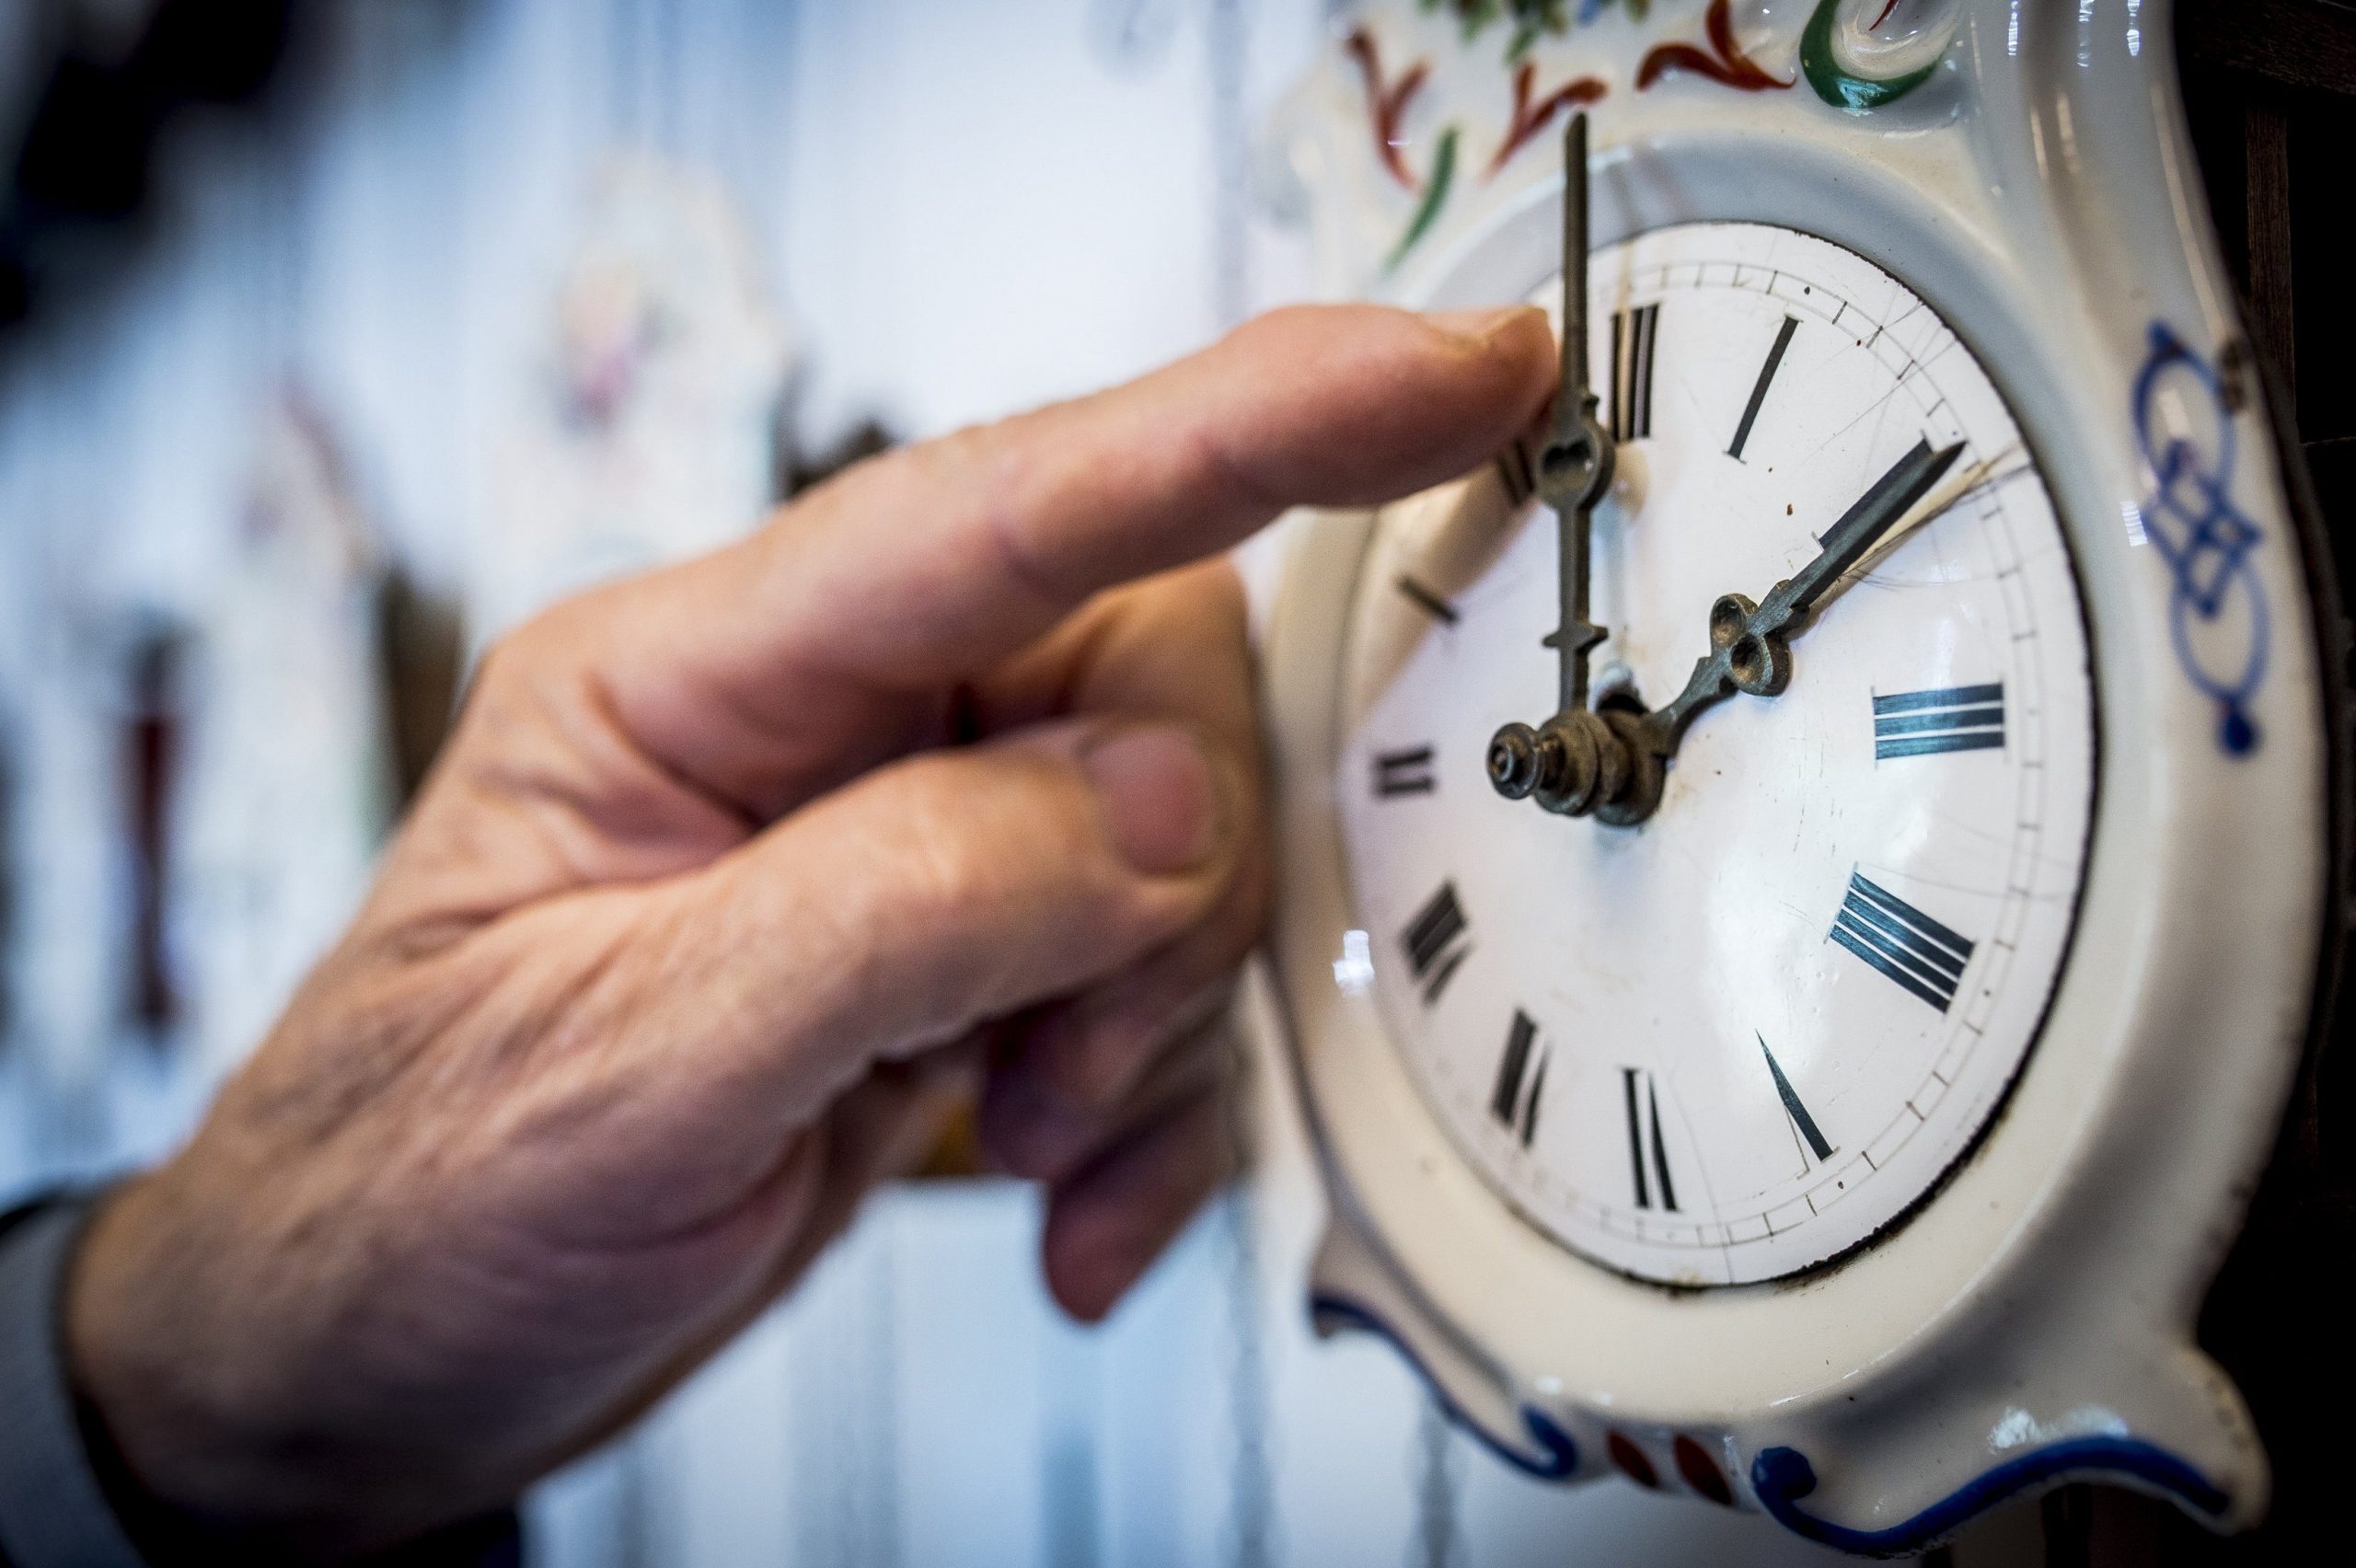 Most Hungarians Want to Lock the Clock